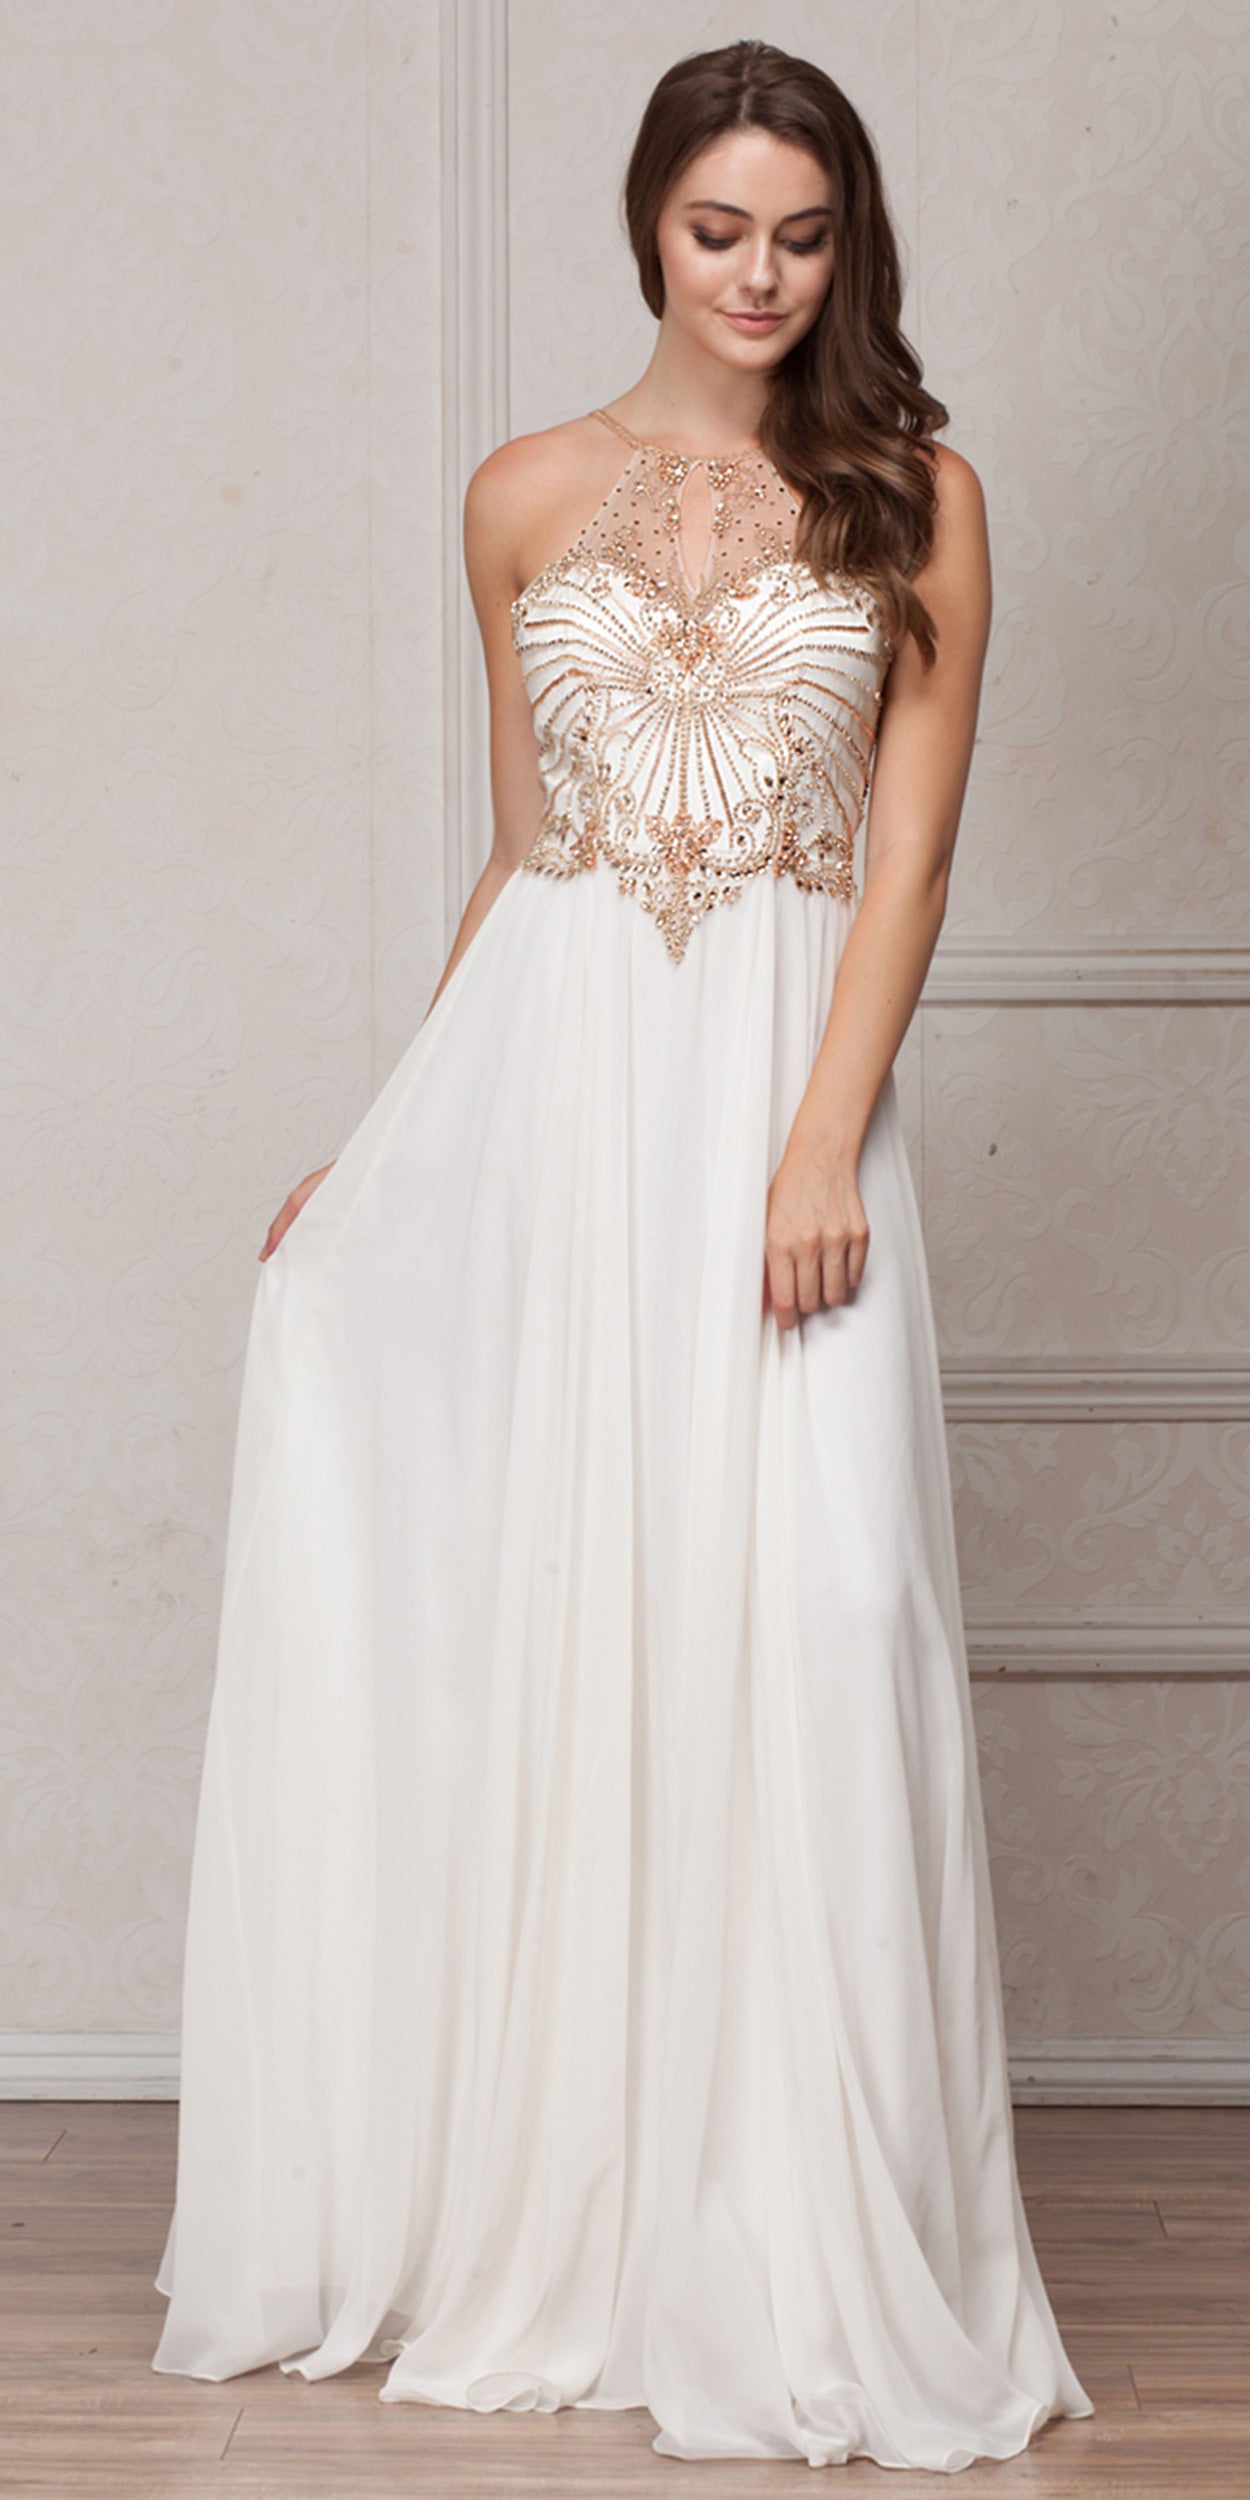 Image of Mesh Beaded Bodice Long Chiffon Formal Evening Dress in Off White